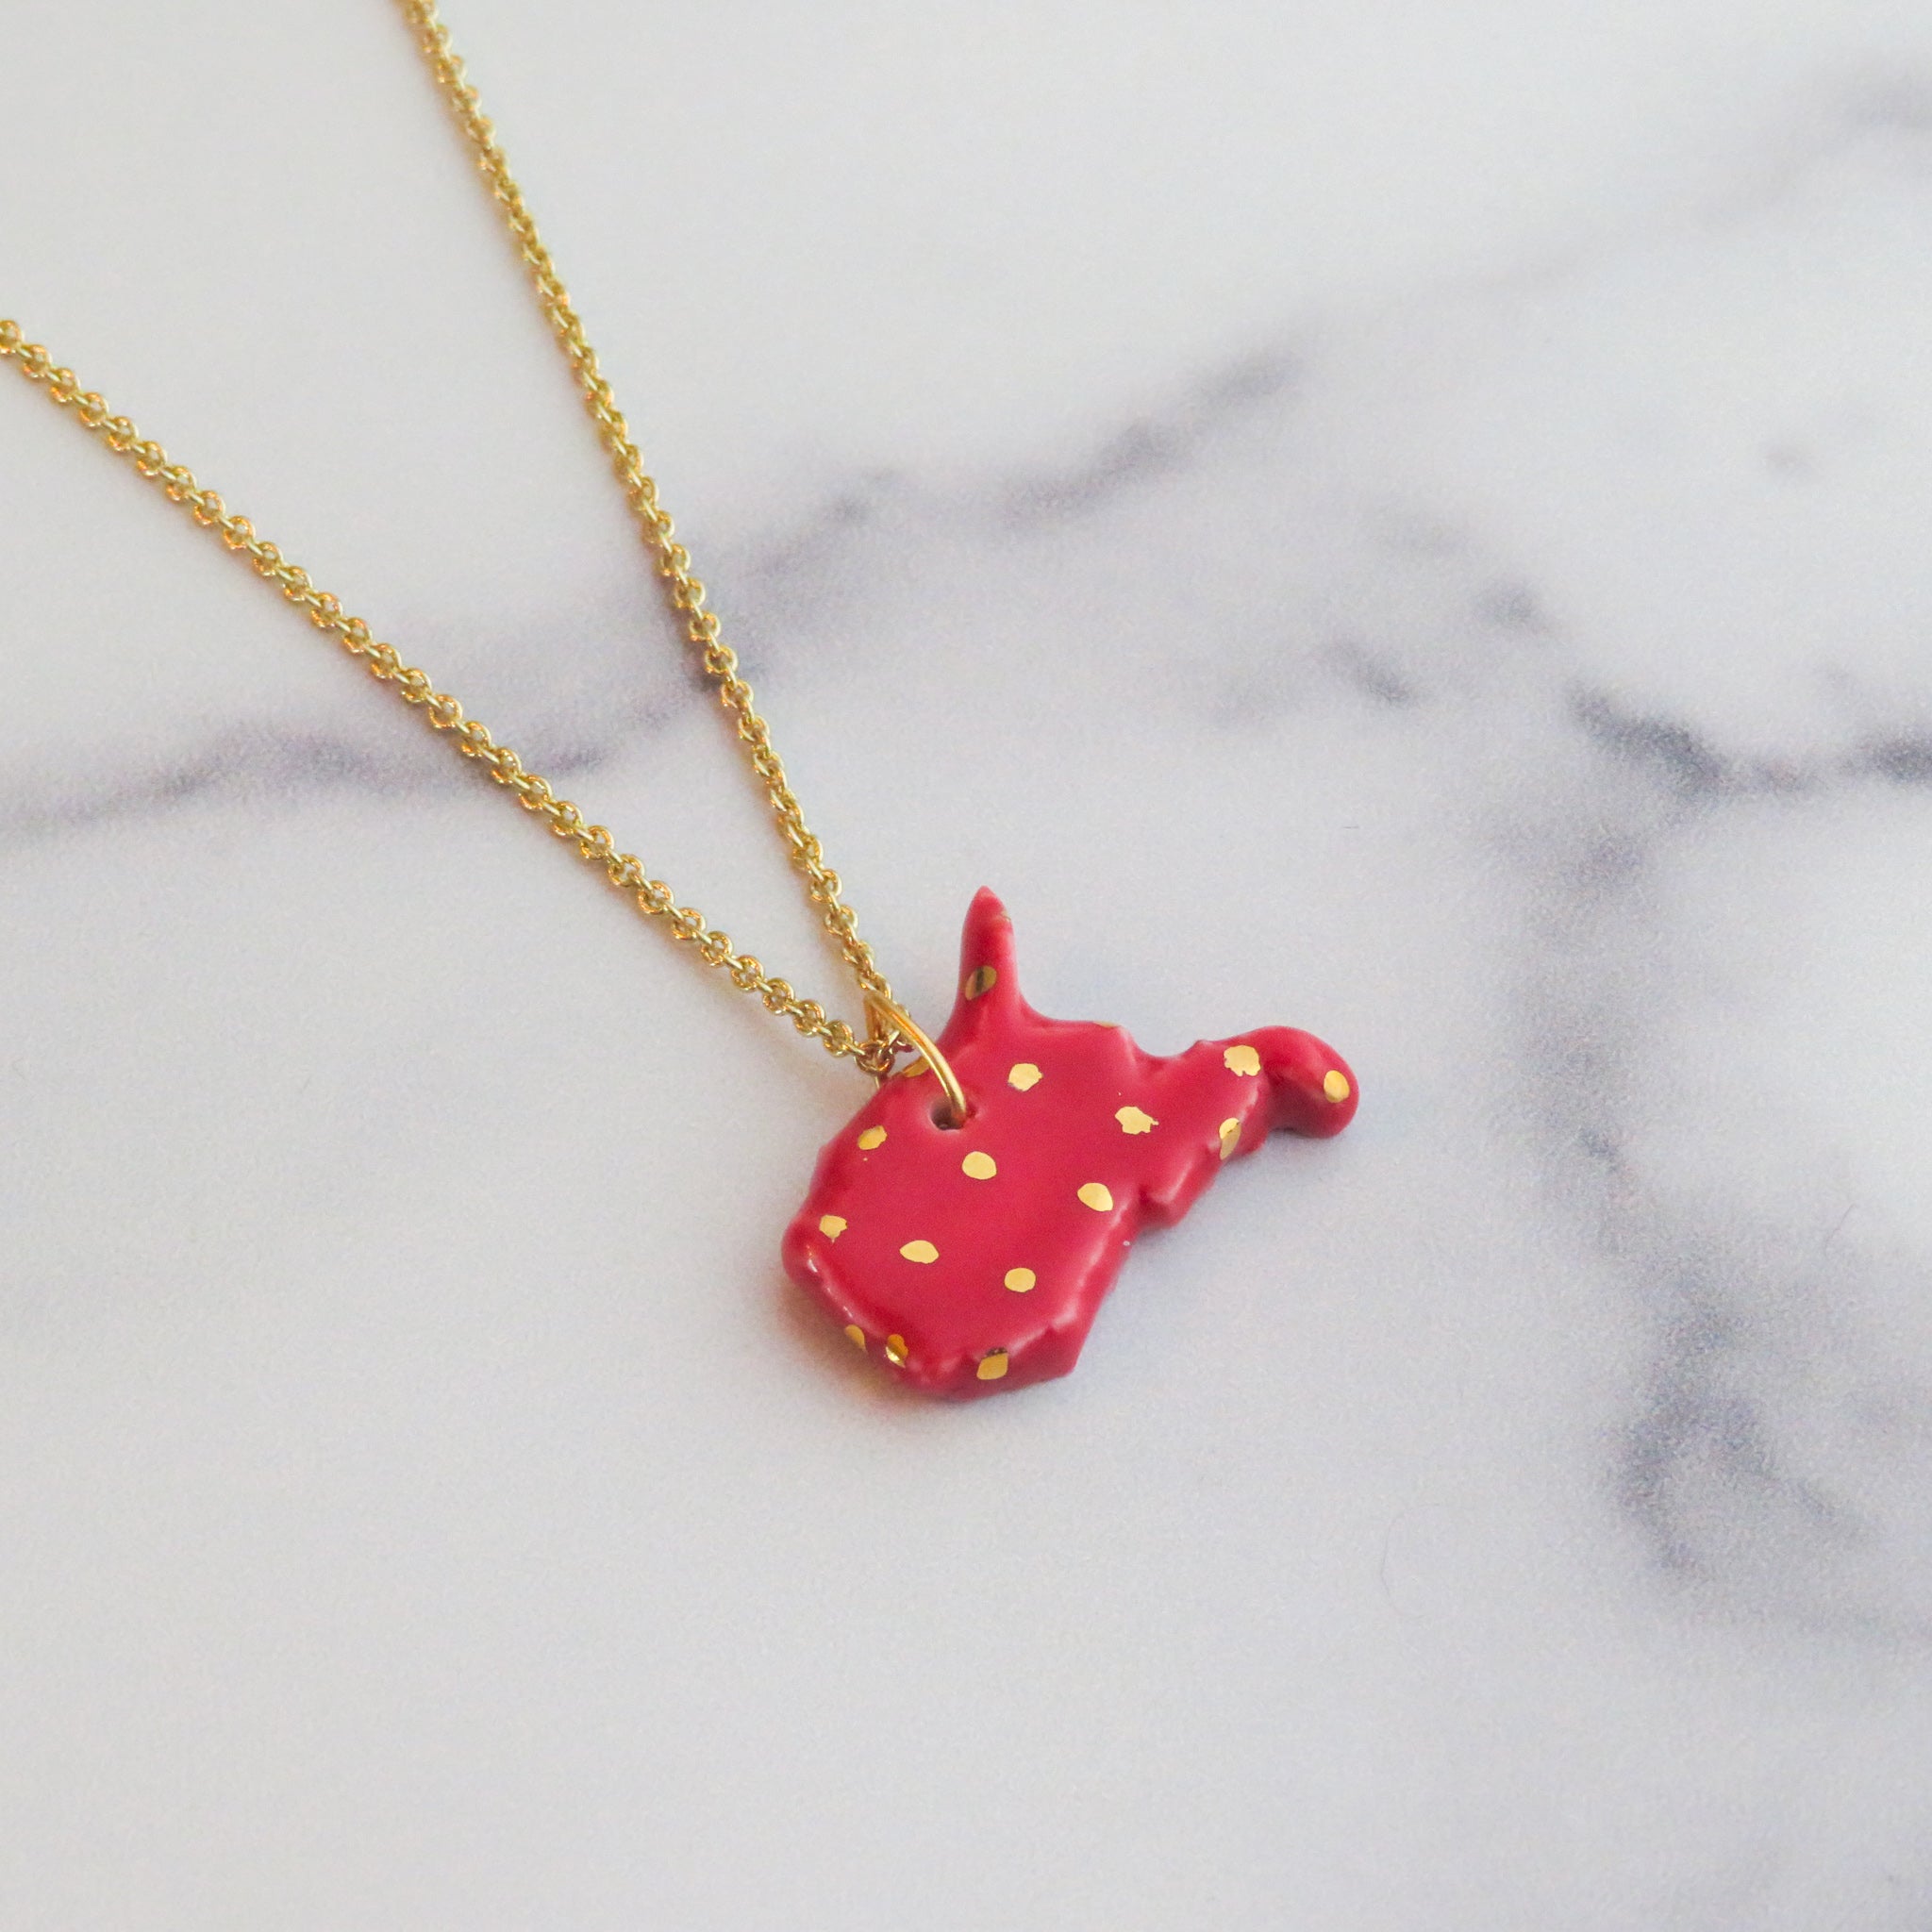 Polka Dot with Wreath Charm Necklace - Pendant Necklace